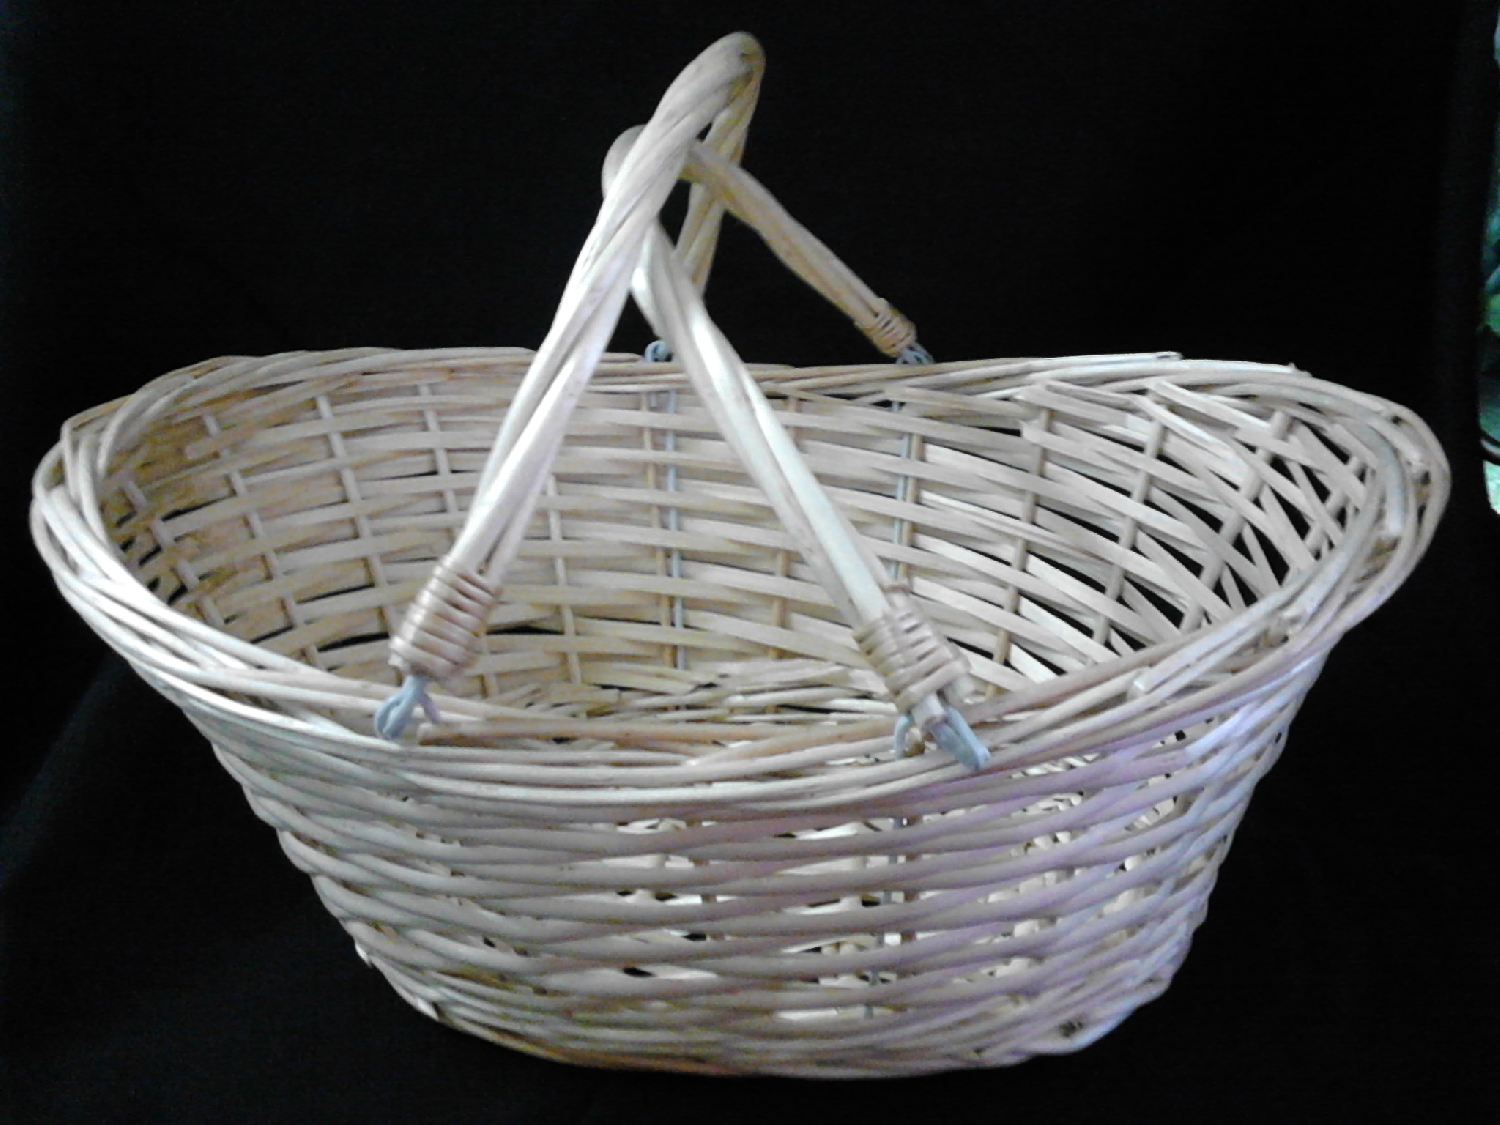 bread-basket--extra-large-with-handles